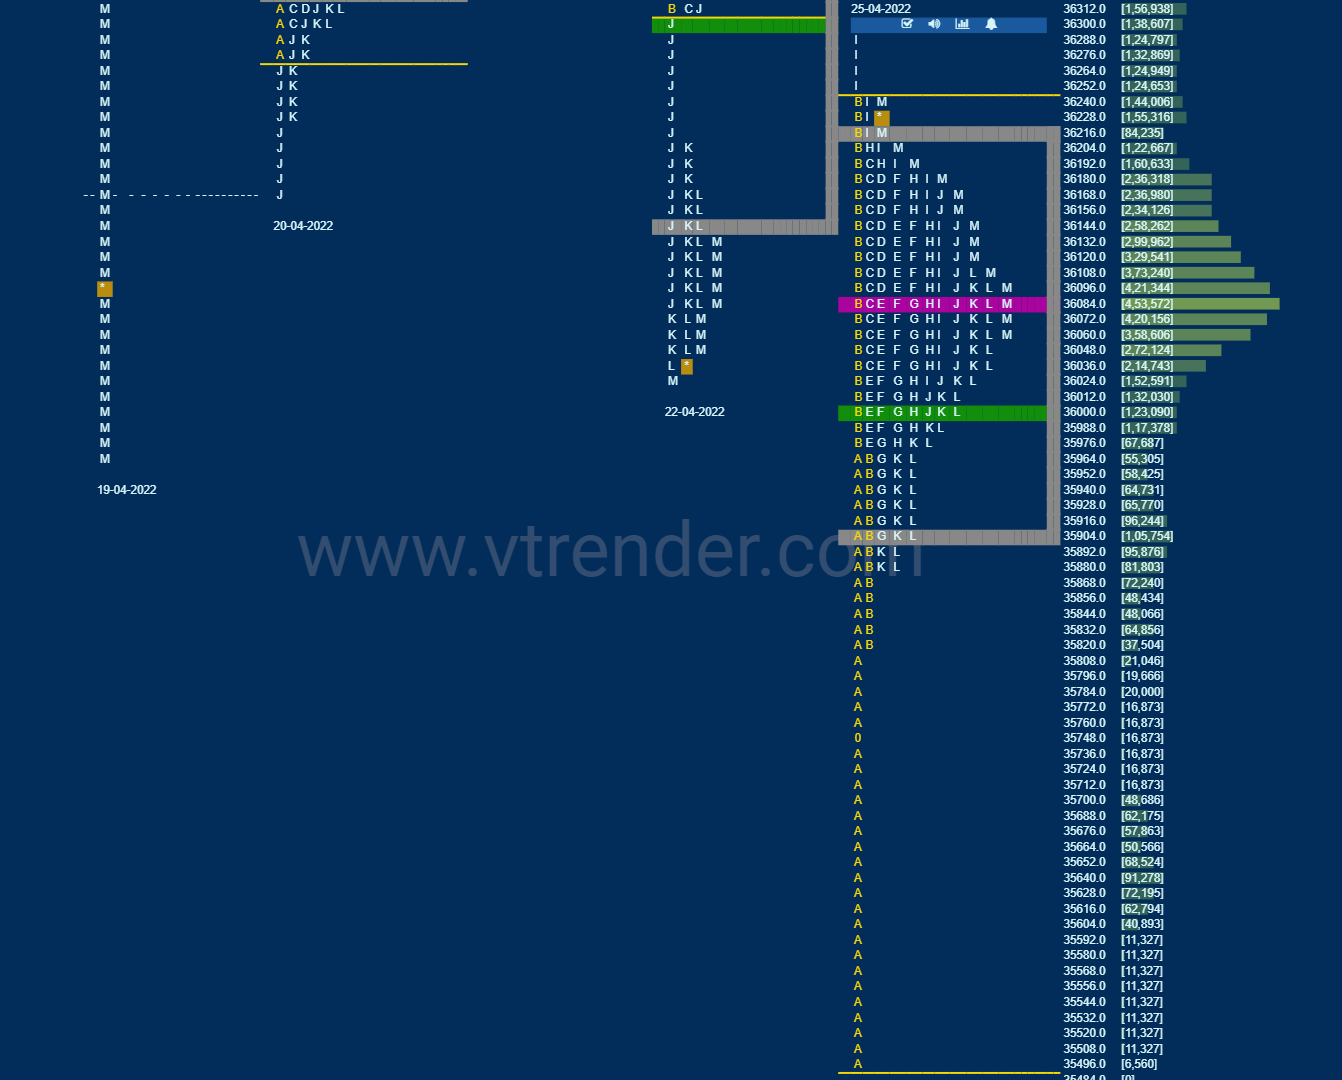 Bnf 14 Market Profile Analysis Dated 25Th April 2022 Banknifty Futures, Charts, Day Trading, Intraday Trading, Intraday Trading Strategies, Market Profile, Market Profile Trading Strategies, Nifty Futures, Order Flow Analysis, Support And Resistance, Technical Analysis, Trading Strategies, Volume Profile Trading